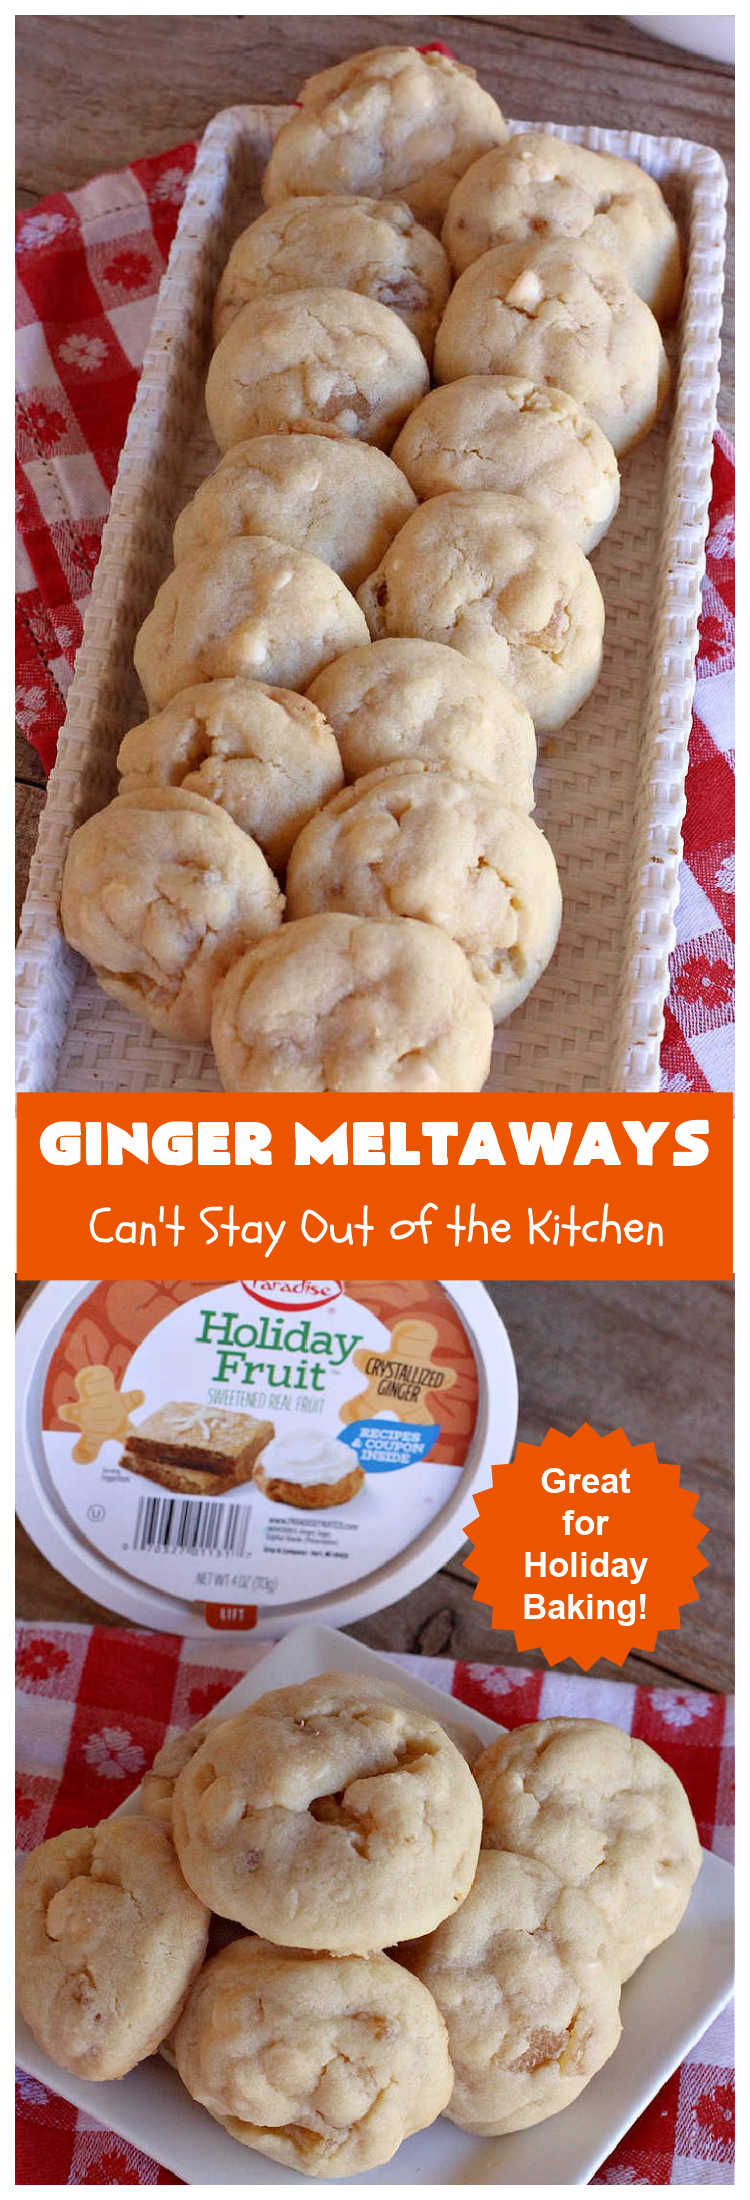 Ginger Meltaways | Can't Stay Out of the Kitchen | these scrumptious melt-in-your-mouth #cookies include #CrystalizedGinger & vanilla chips. They are phenomenal & perfect for a #ChristmasCookieExchange, #holiday #baking or parties or even potluck dinners! #ginger #ChristmasCookie #GingerMeltaways #ParadiseFruitCompany #ParadiseCandiedFruit